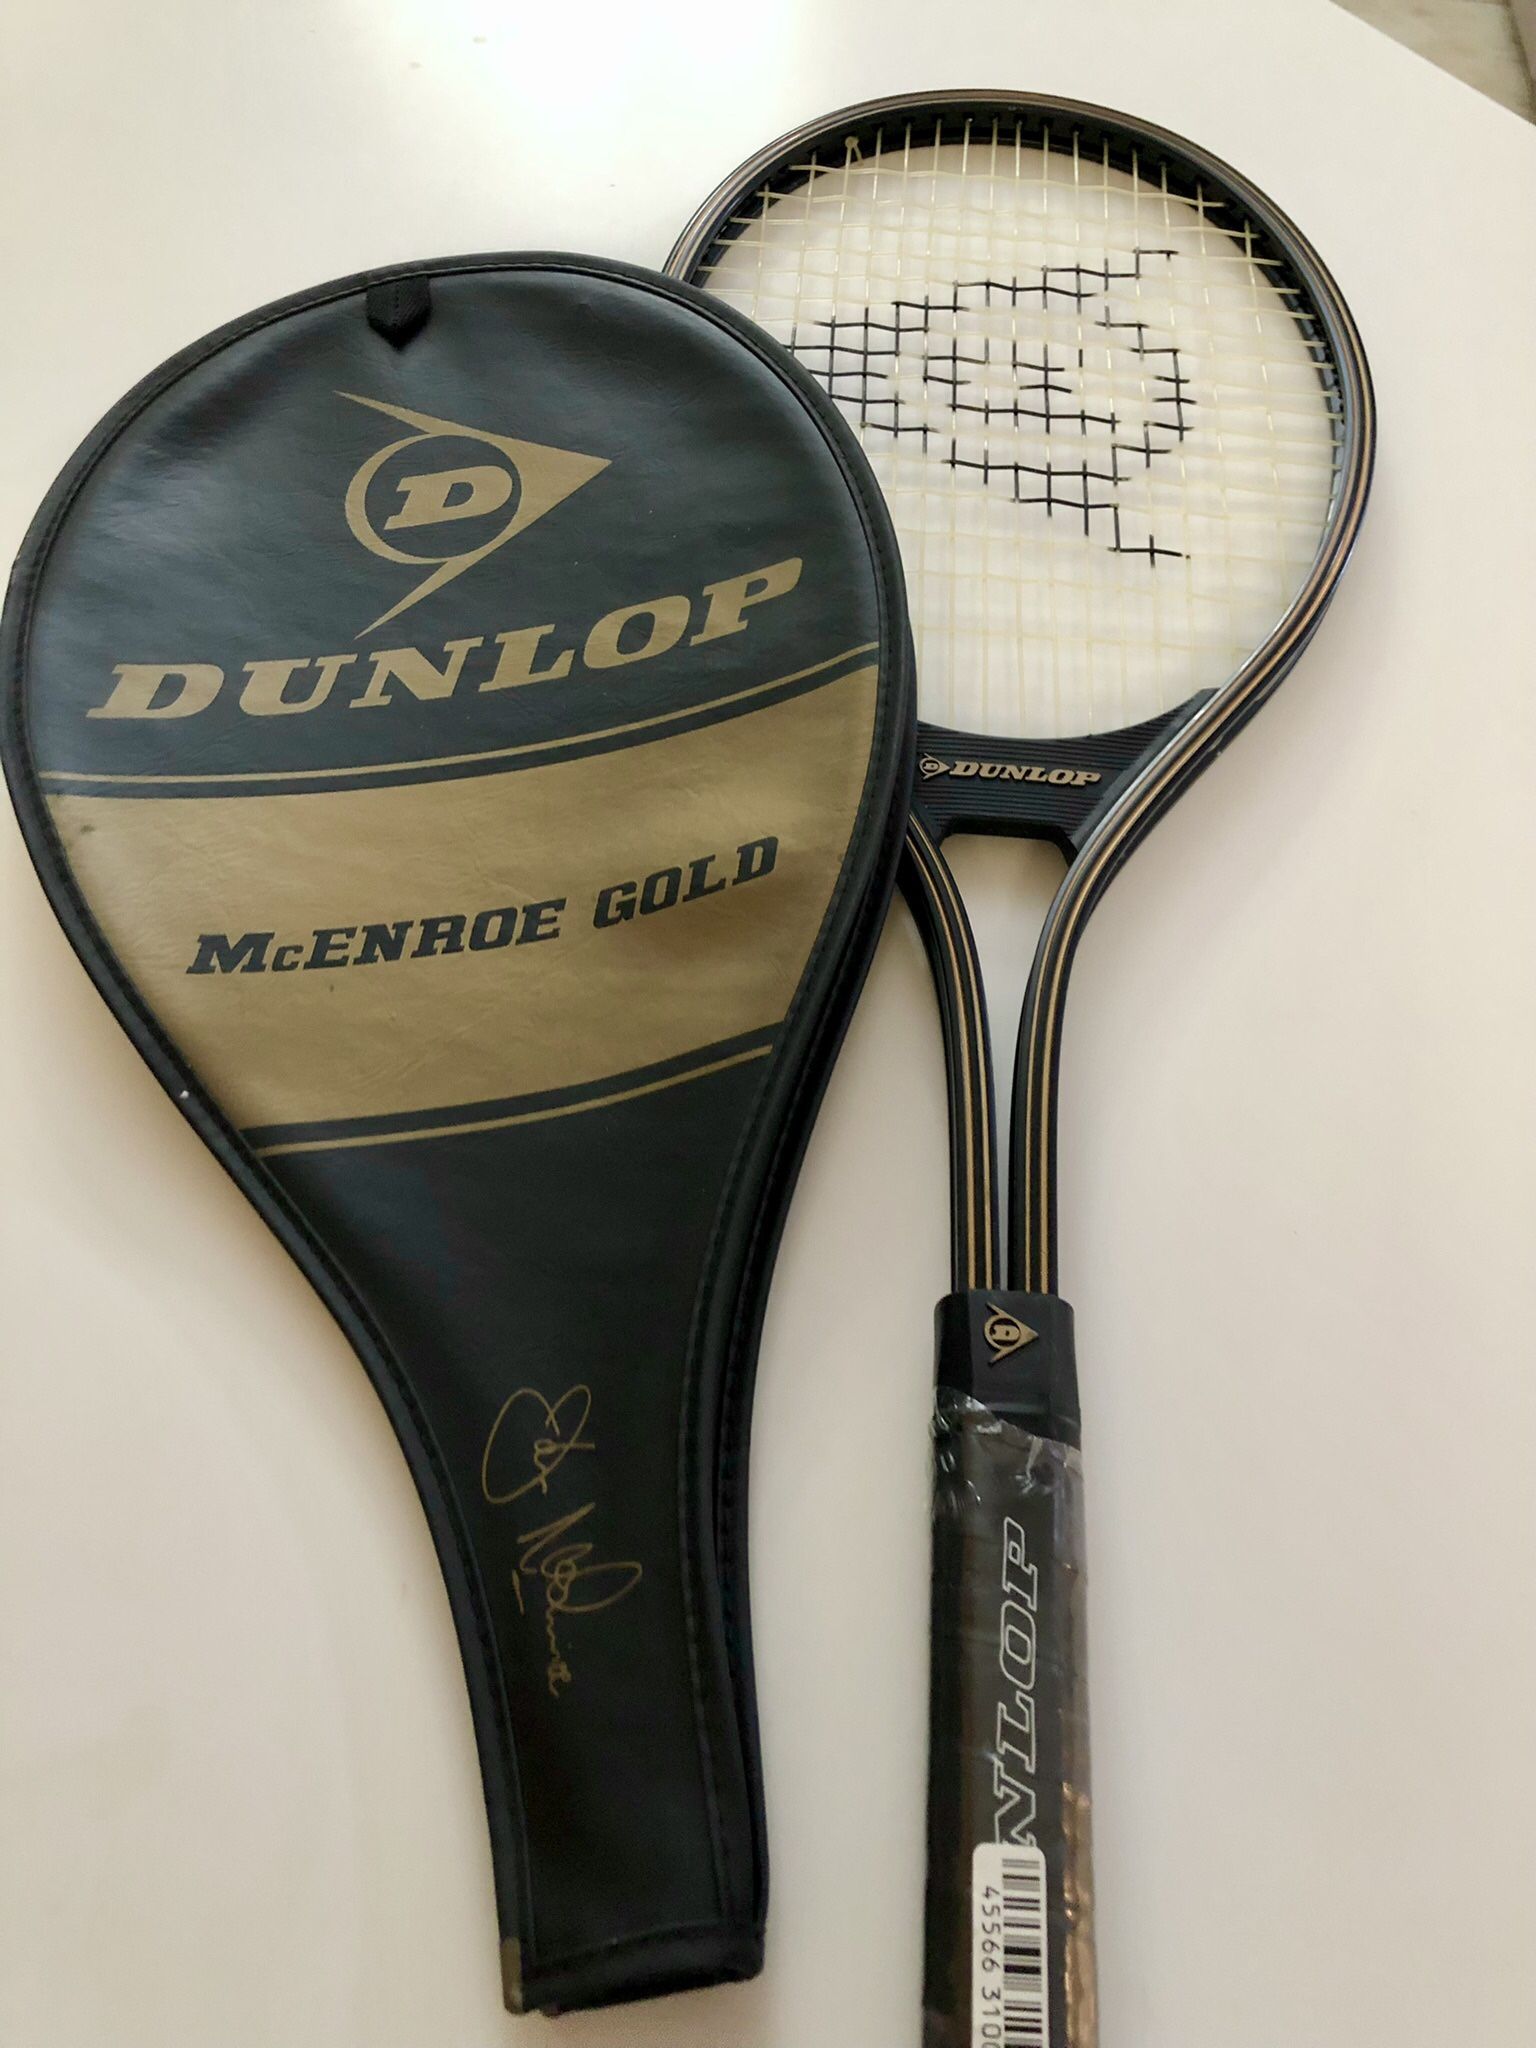 Dunlop John McEnroe Gold 4.25 Tennis Racket With Cover. New 